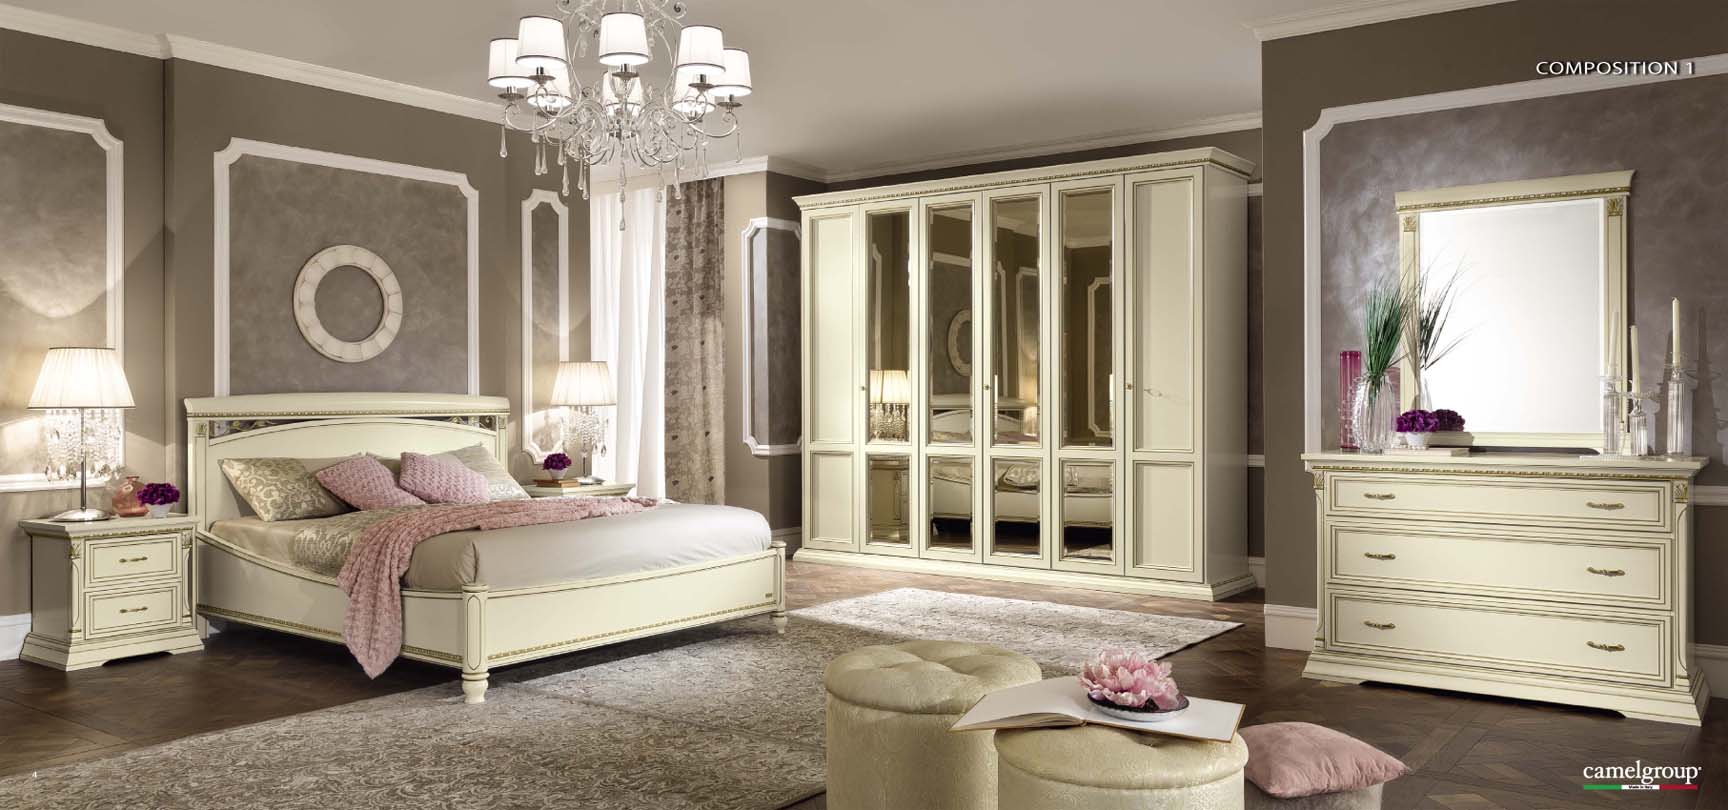 Bedroom Furniture Beds Treviso Night Composition 1 in White Ash